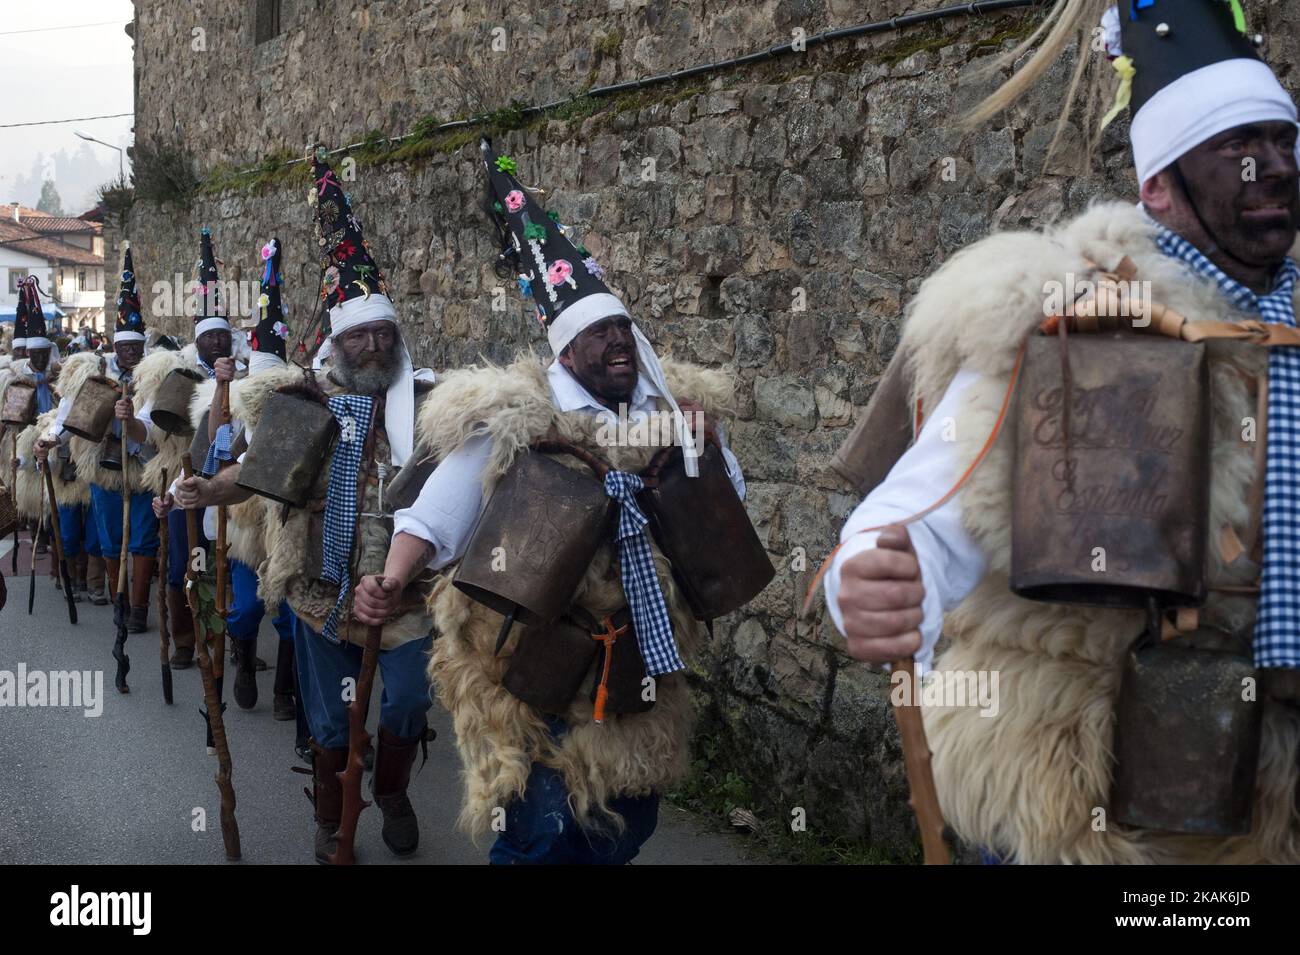 The zarramacos cross the streets of the town of Silio in the party of the Vijanera festival on January 8, 2017 in Silio, Cantabria province, Spain, considered the first winter carnival in Europe as they ring their bells to celebrate the capture of the bear that symbolizes evil. (Photo by Joaquin Gomez Sastre/NurPhoto) *** Please Use Credit from Credit Field *** Stock Photo